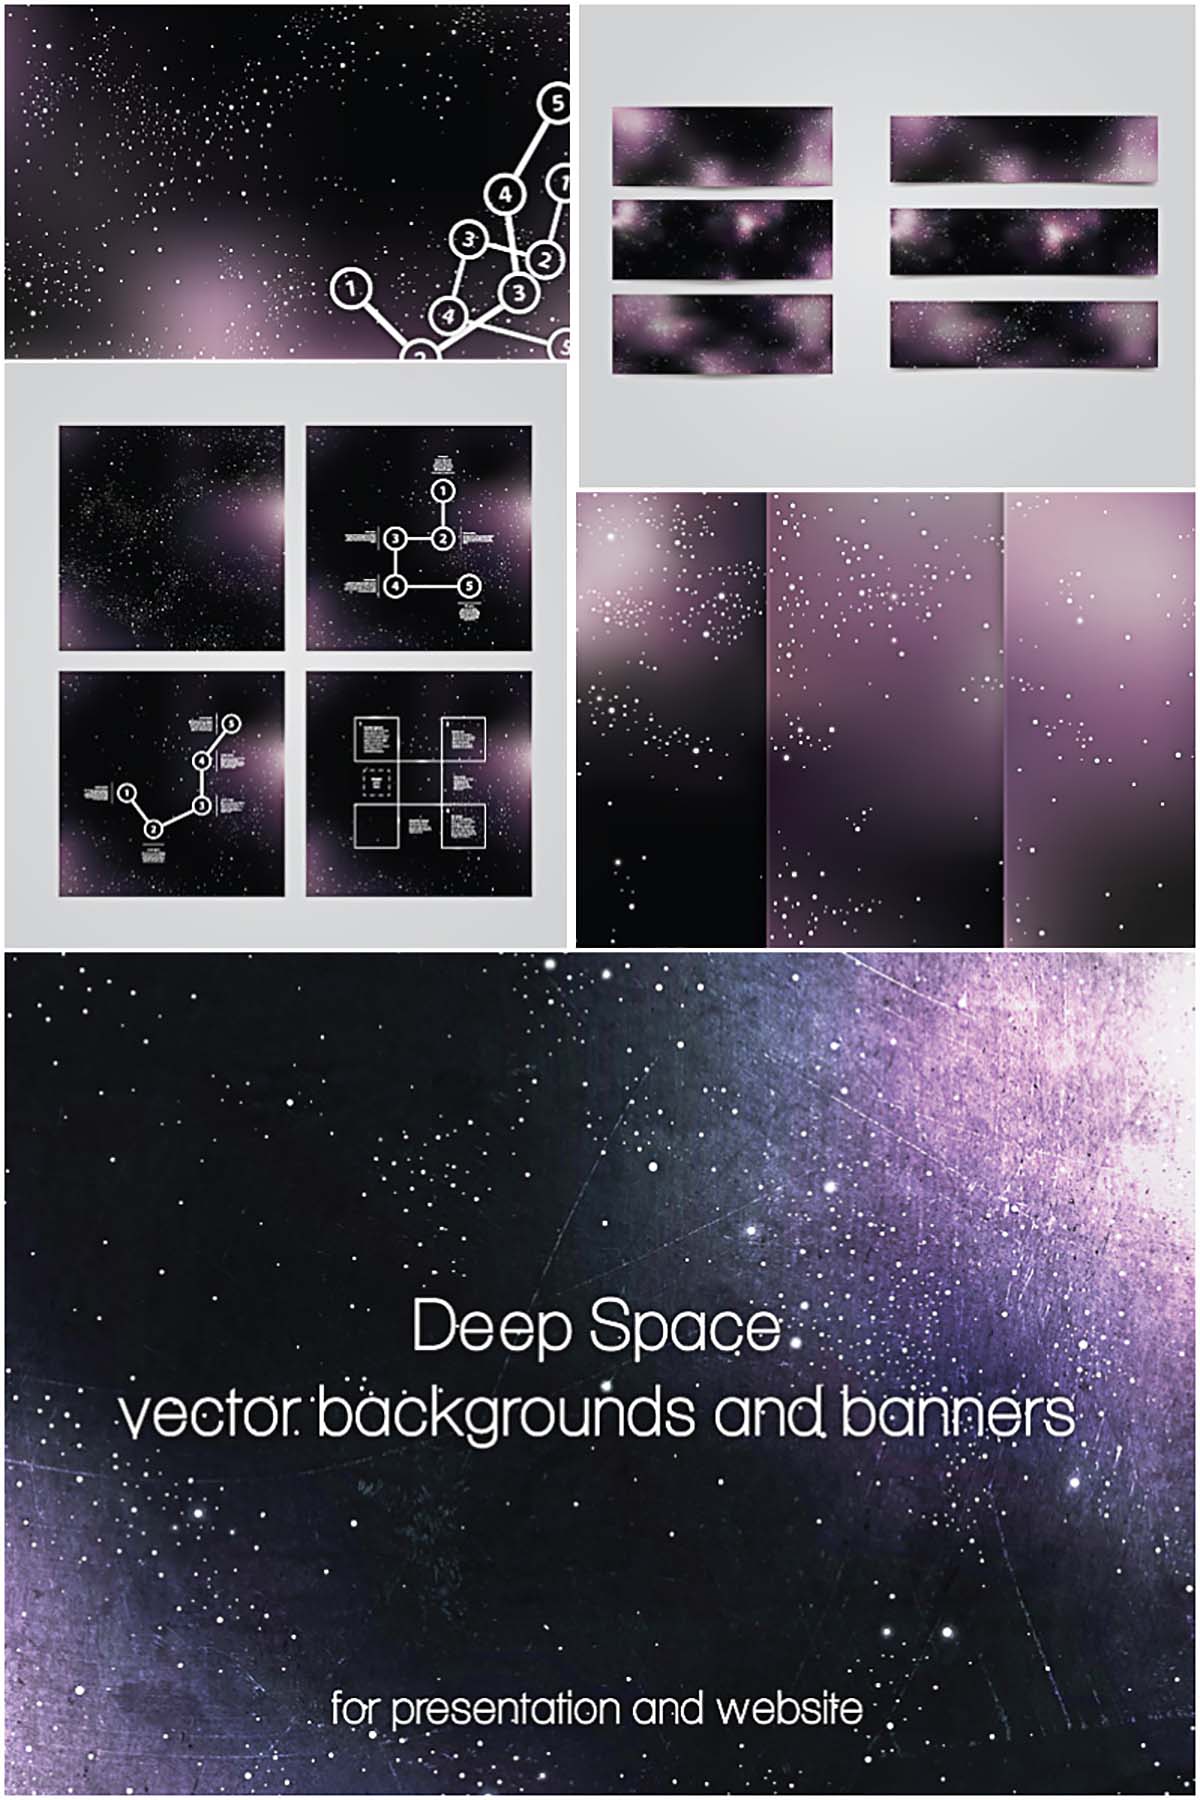 Deep Space Banners And Backgrounds Set Free Download